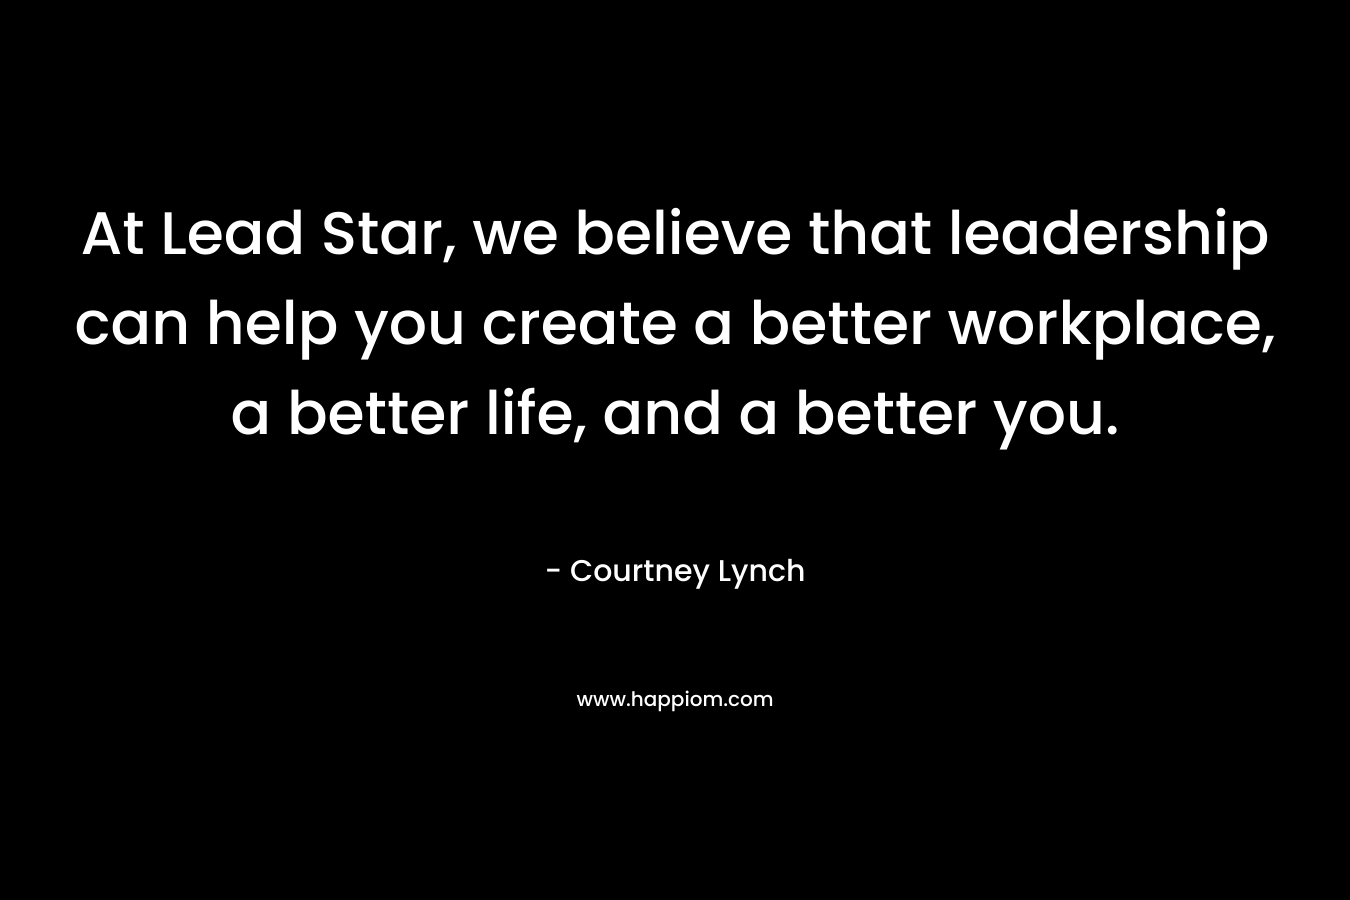 At Lead Star, we believe that leadership can help you create a better workplace, a better life, and a better you.